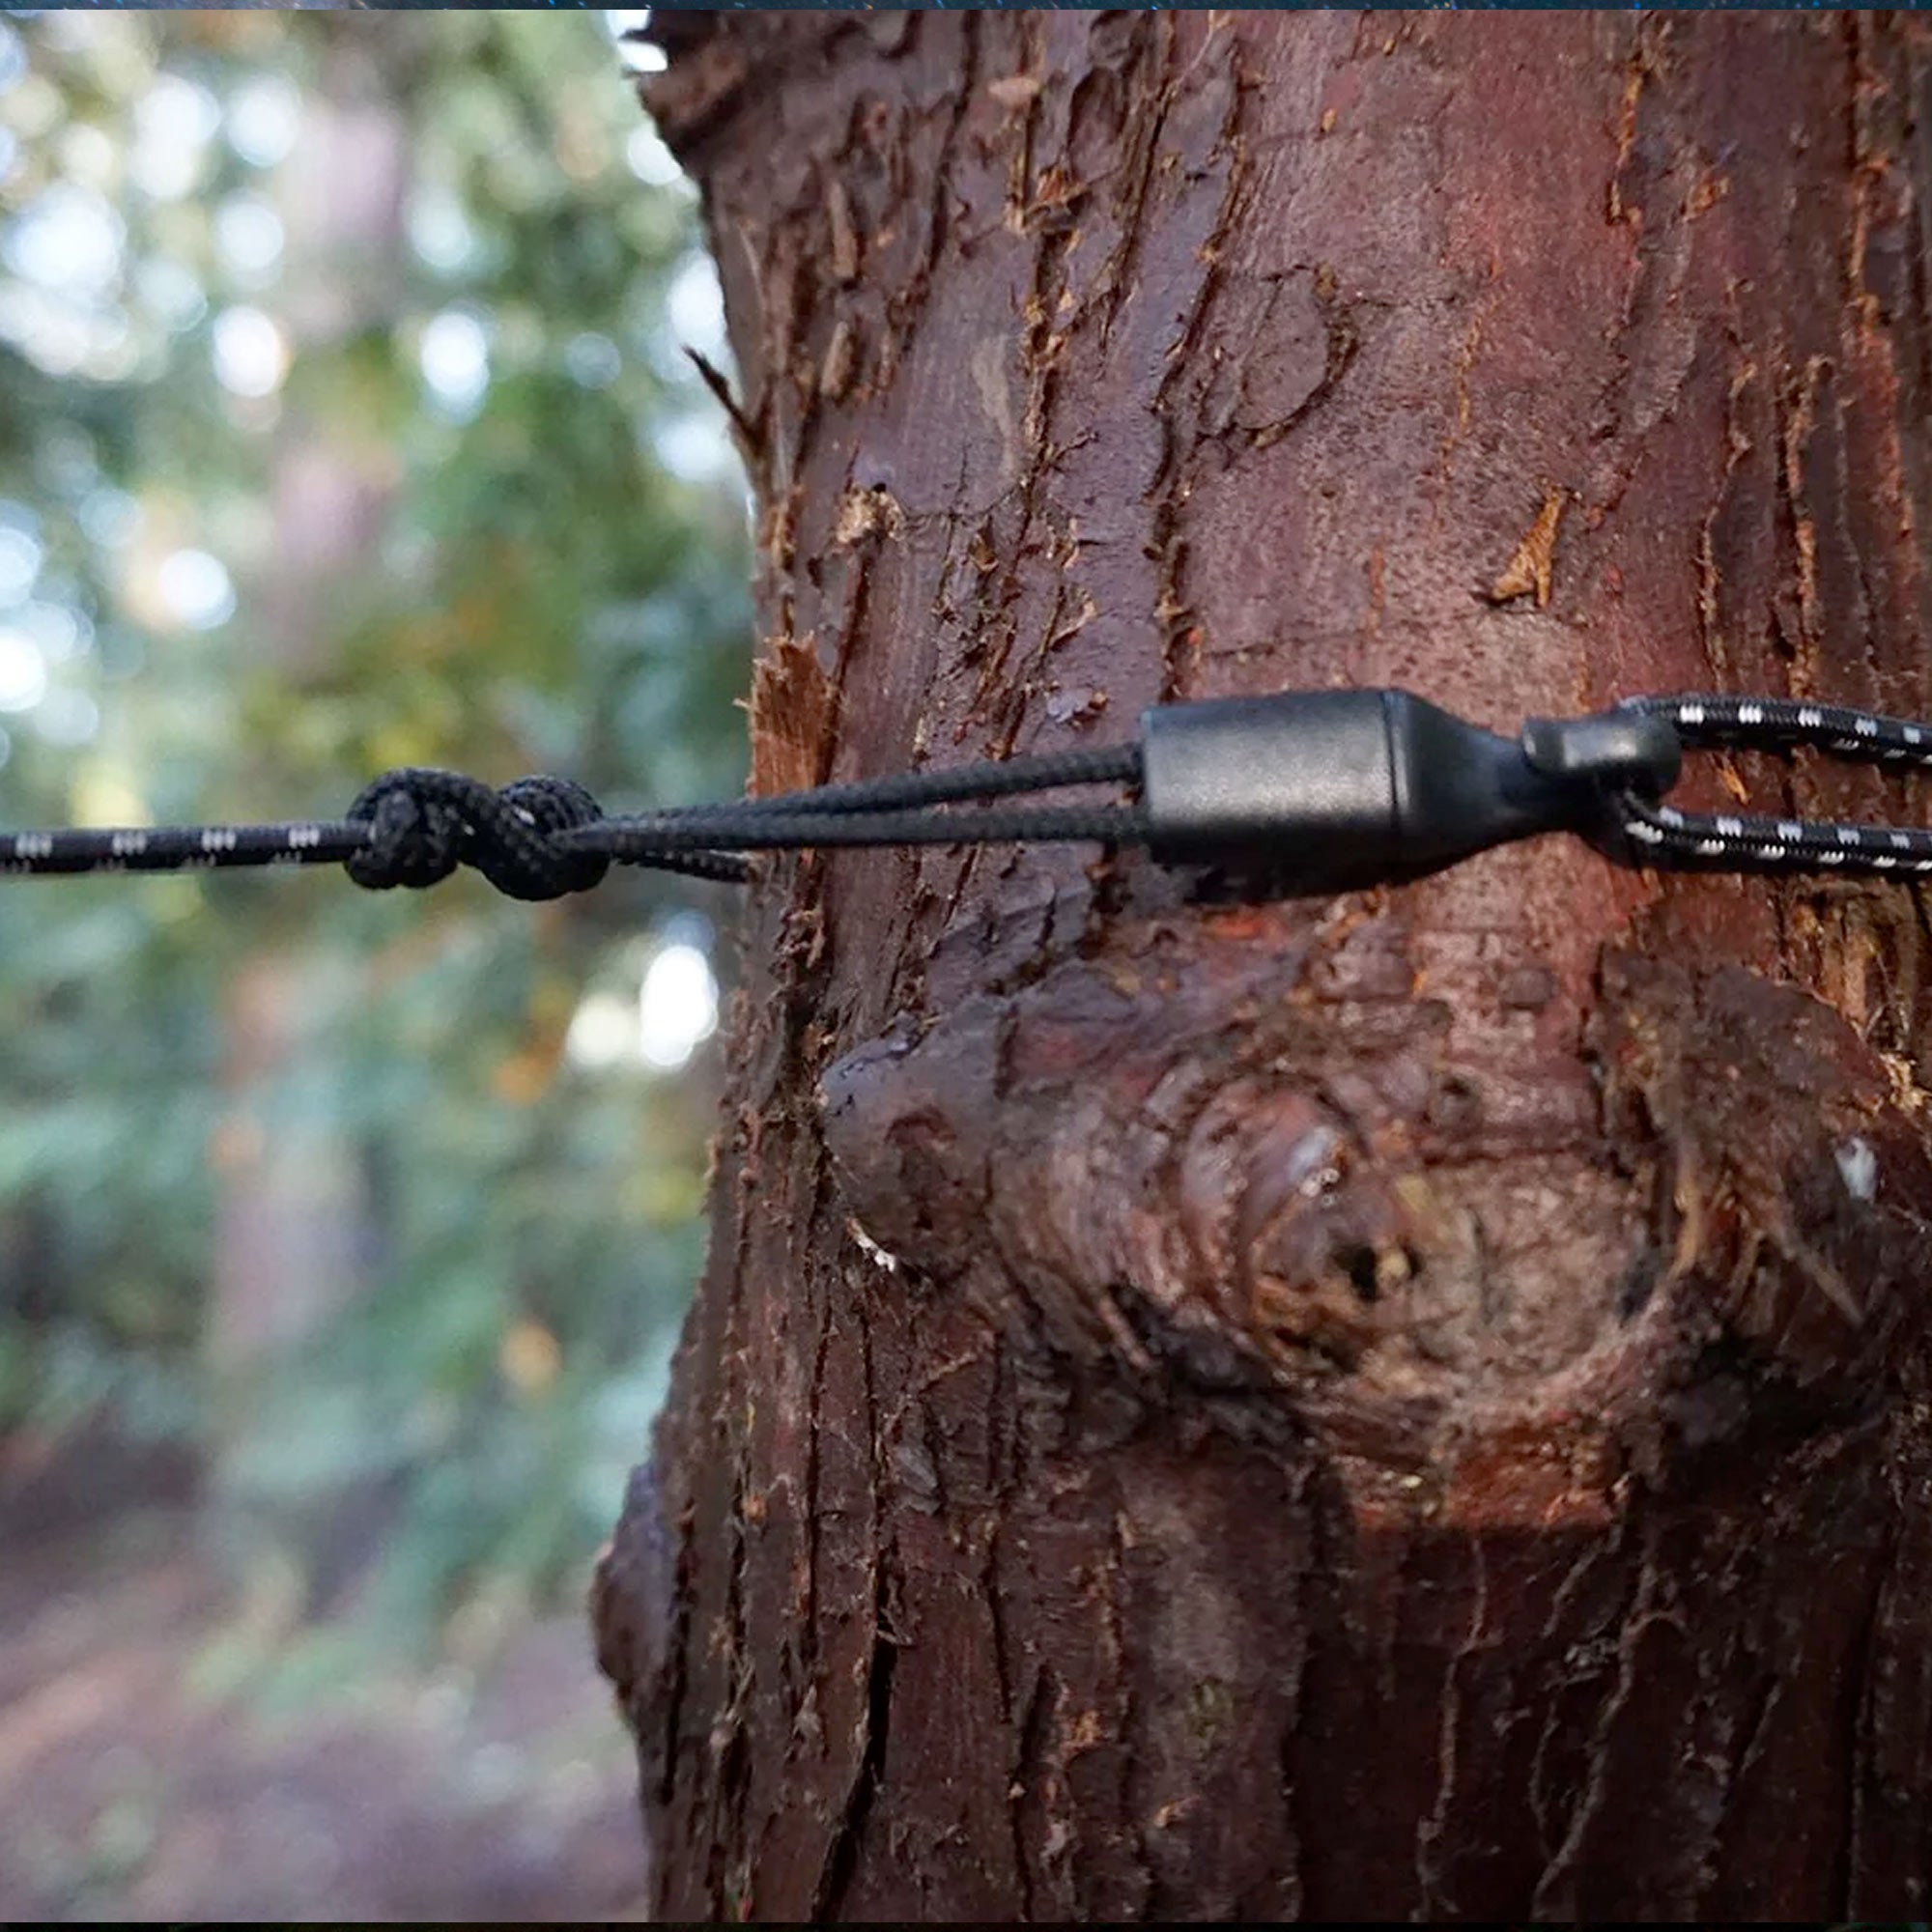 cinch lock cordage from the abrigo wraps around tree easily and holds in place with ease